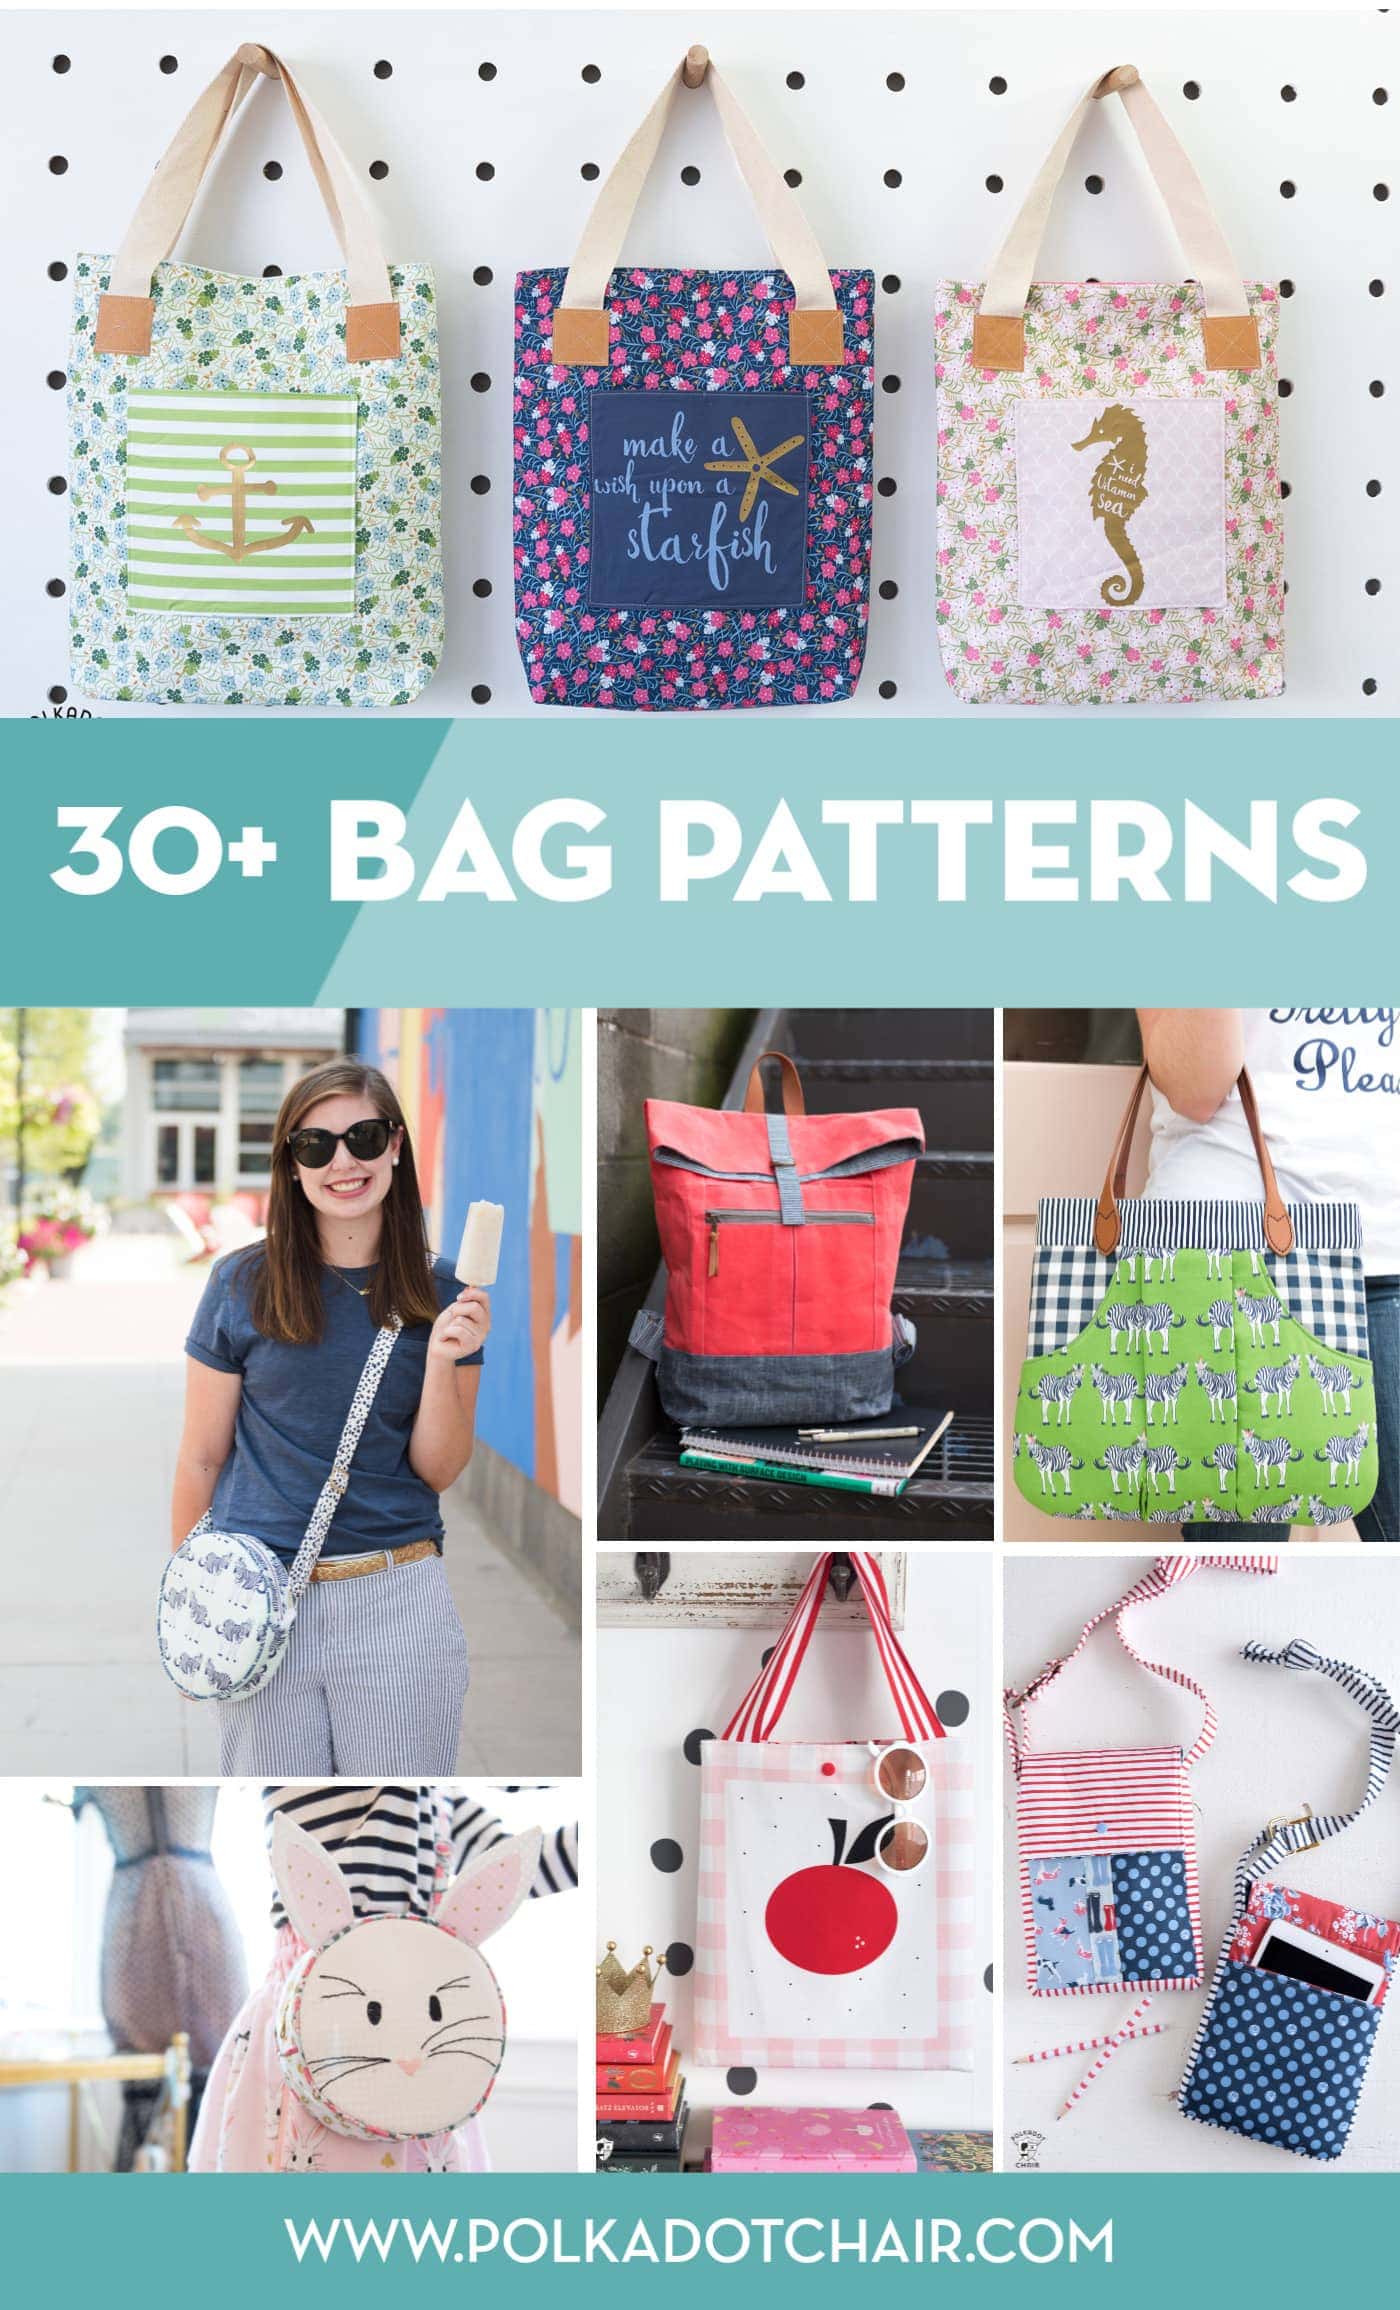 6 Easy and Quick DIY Totes to Sew, Decorate, and Use Every Day